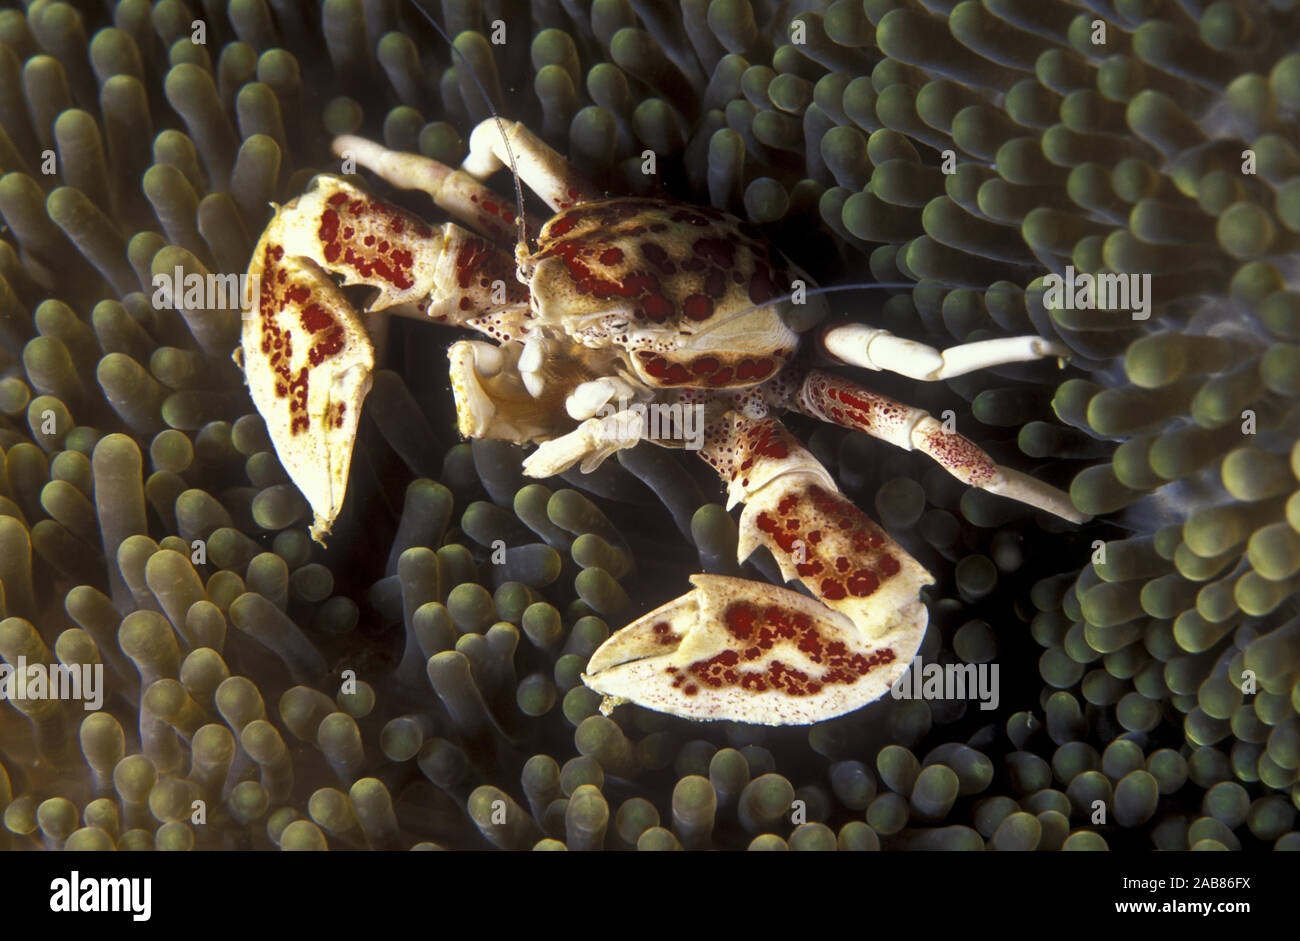 Porcelain crab (Neopetrolisthes maculatus), lives among tentacles of large anemones in tropical waters. Not true crabs. Port Moresby, Papua New Guinea Stock Photo